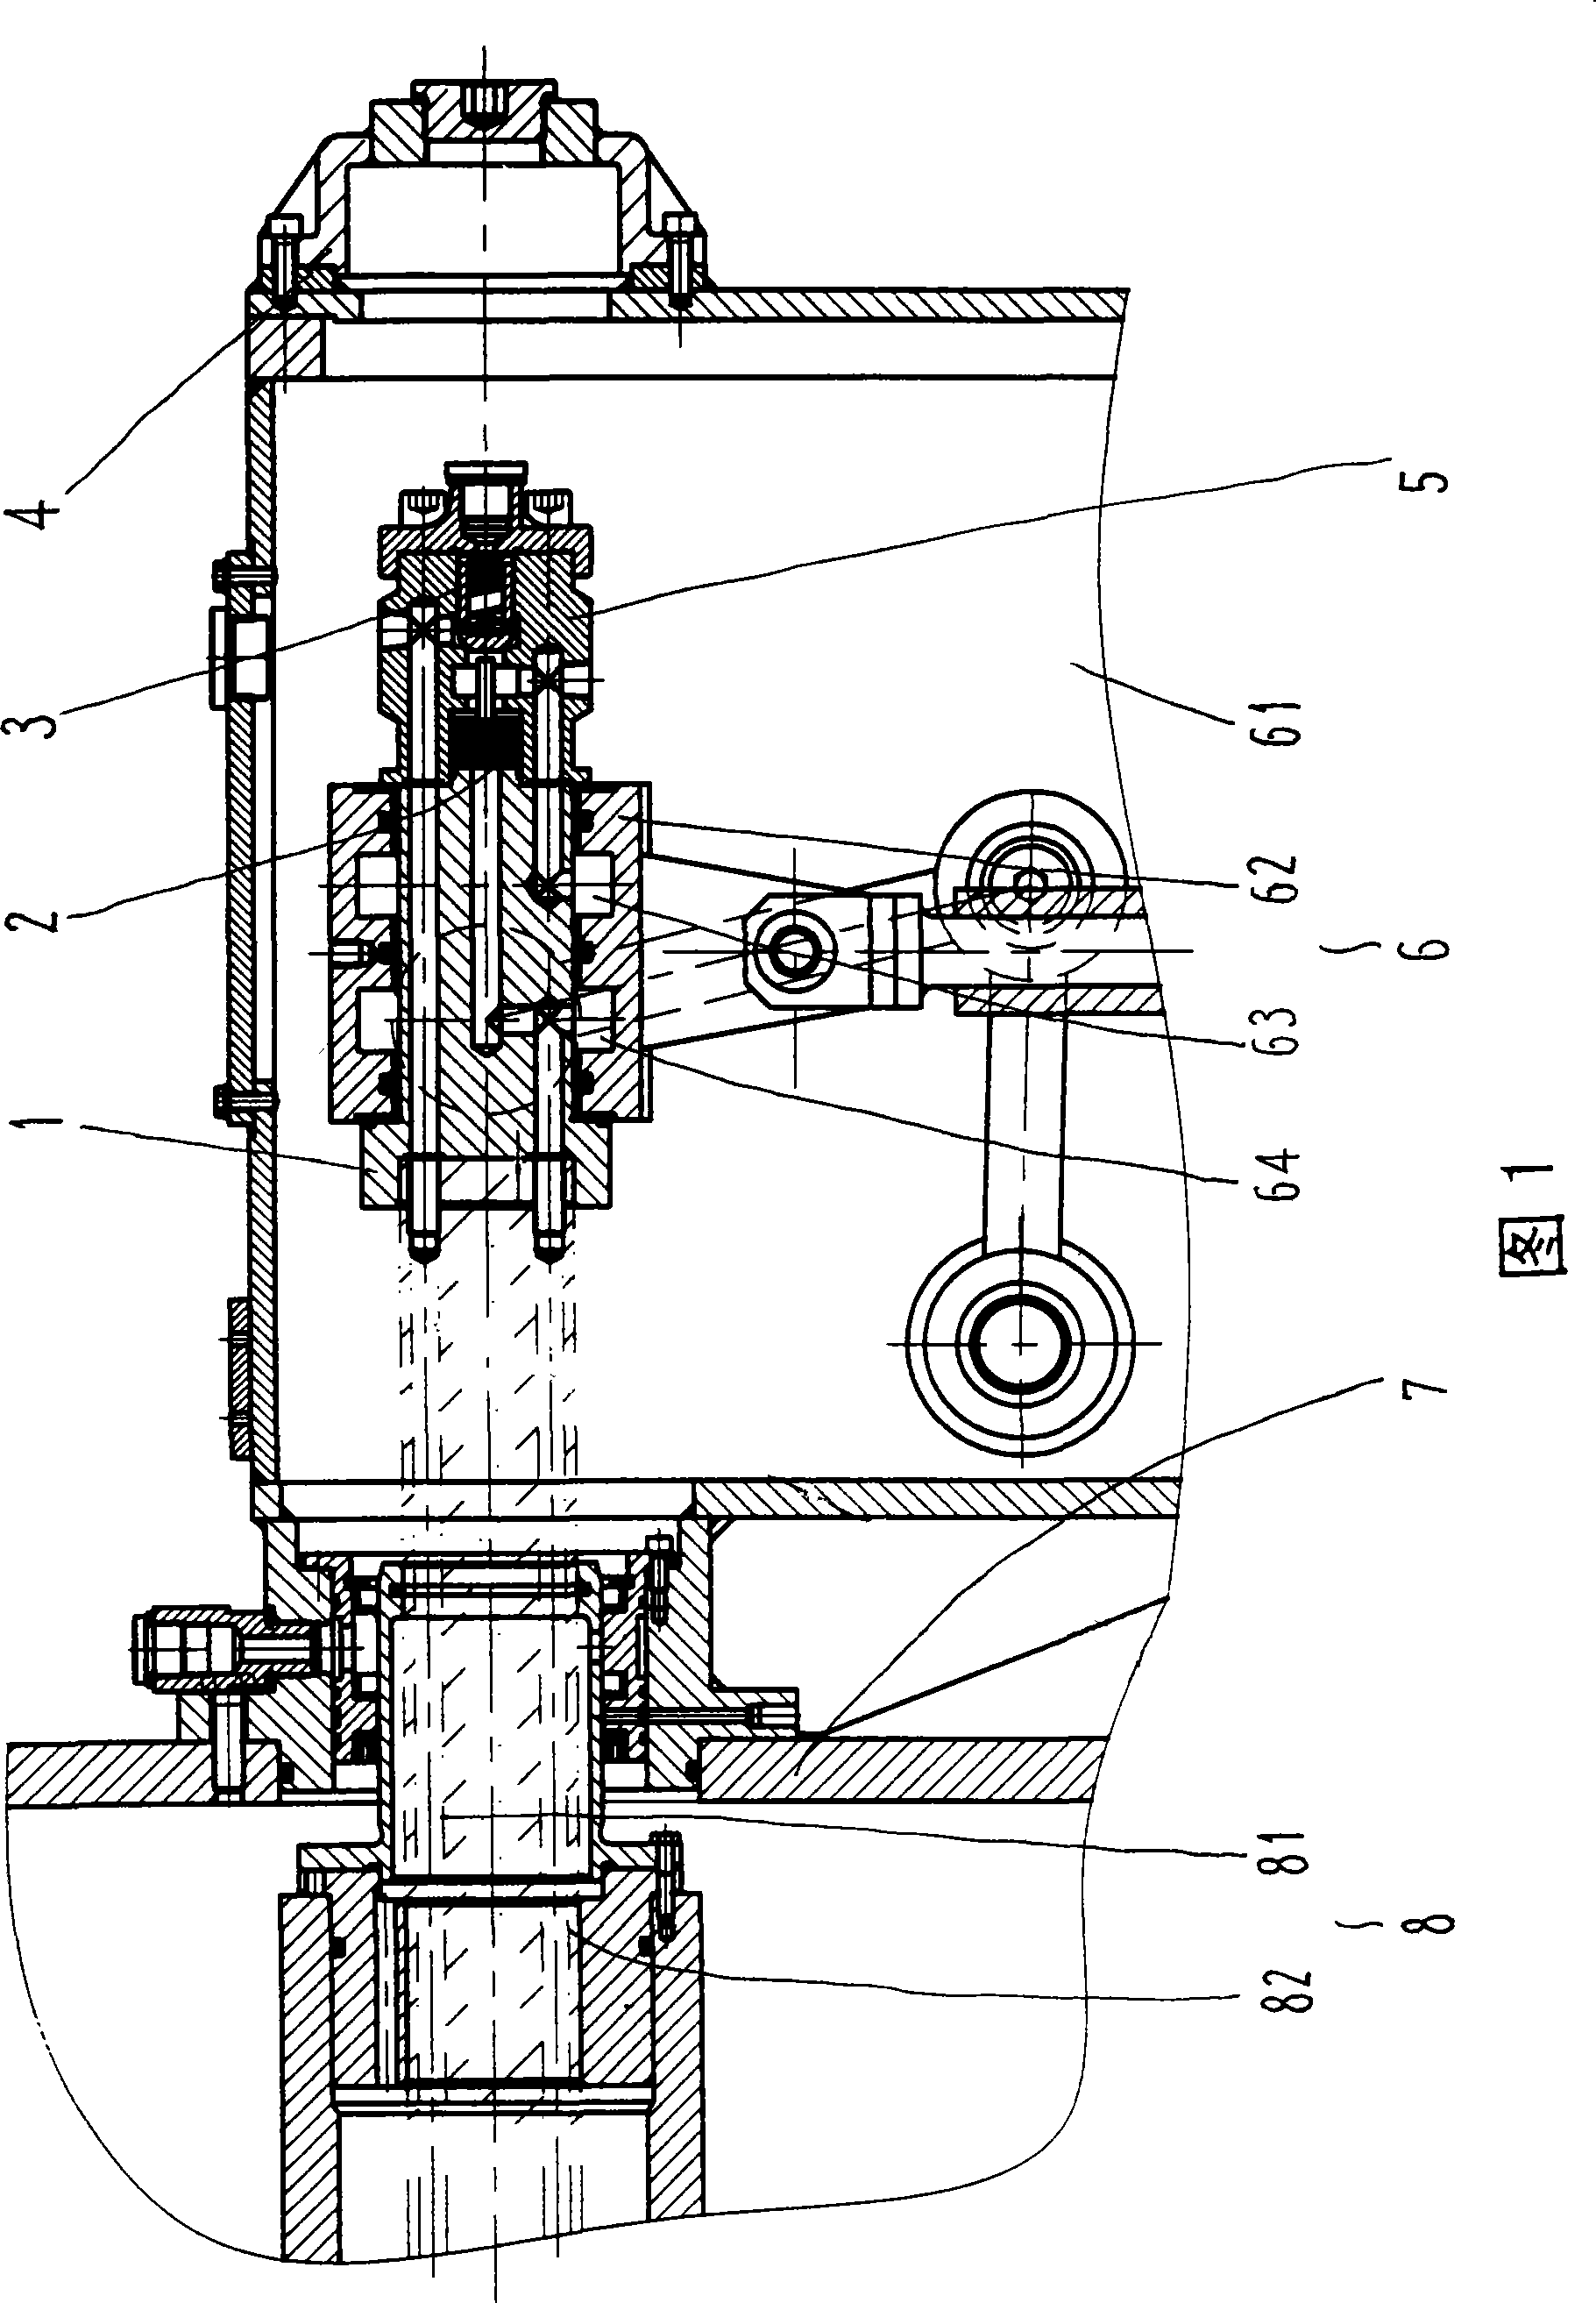 Controllable pitch propeller unidirectional locking arrangement